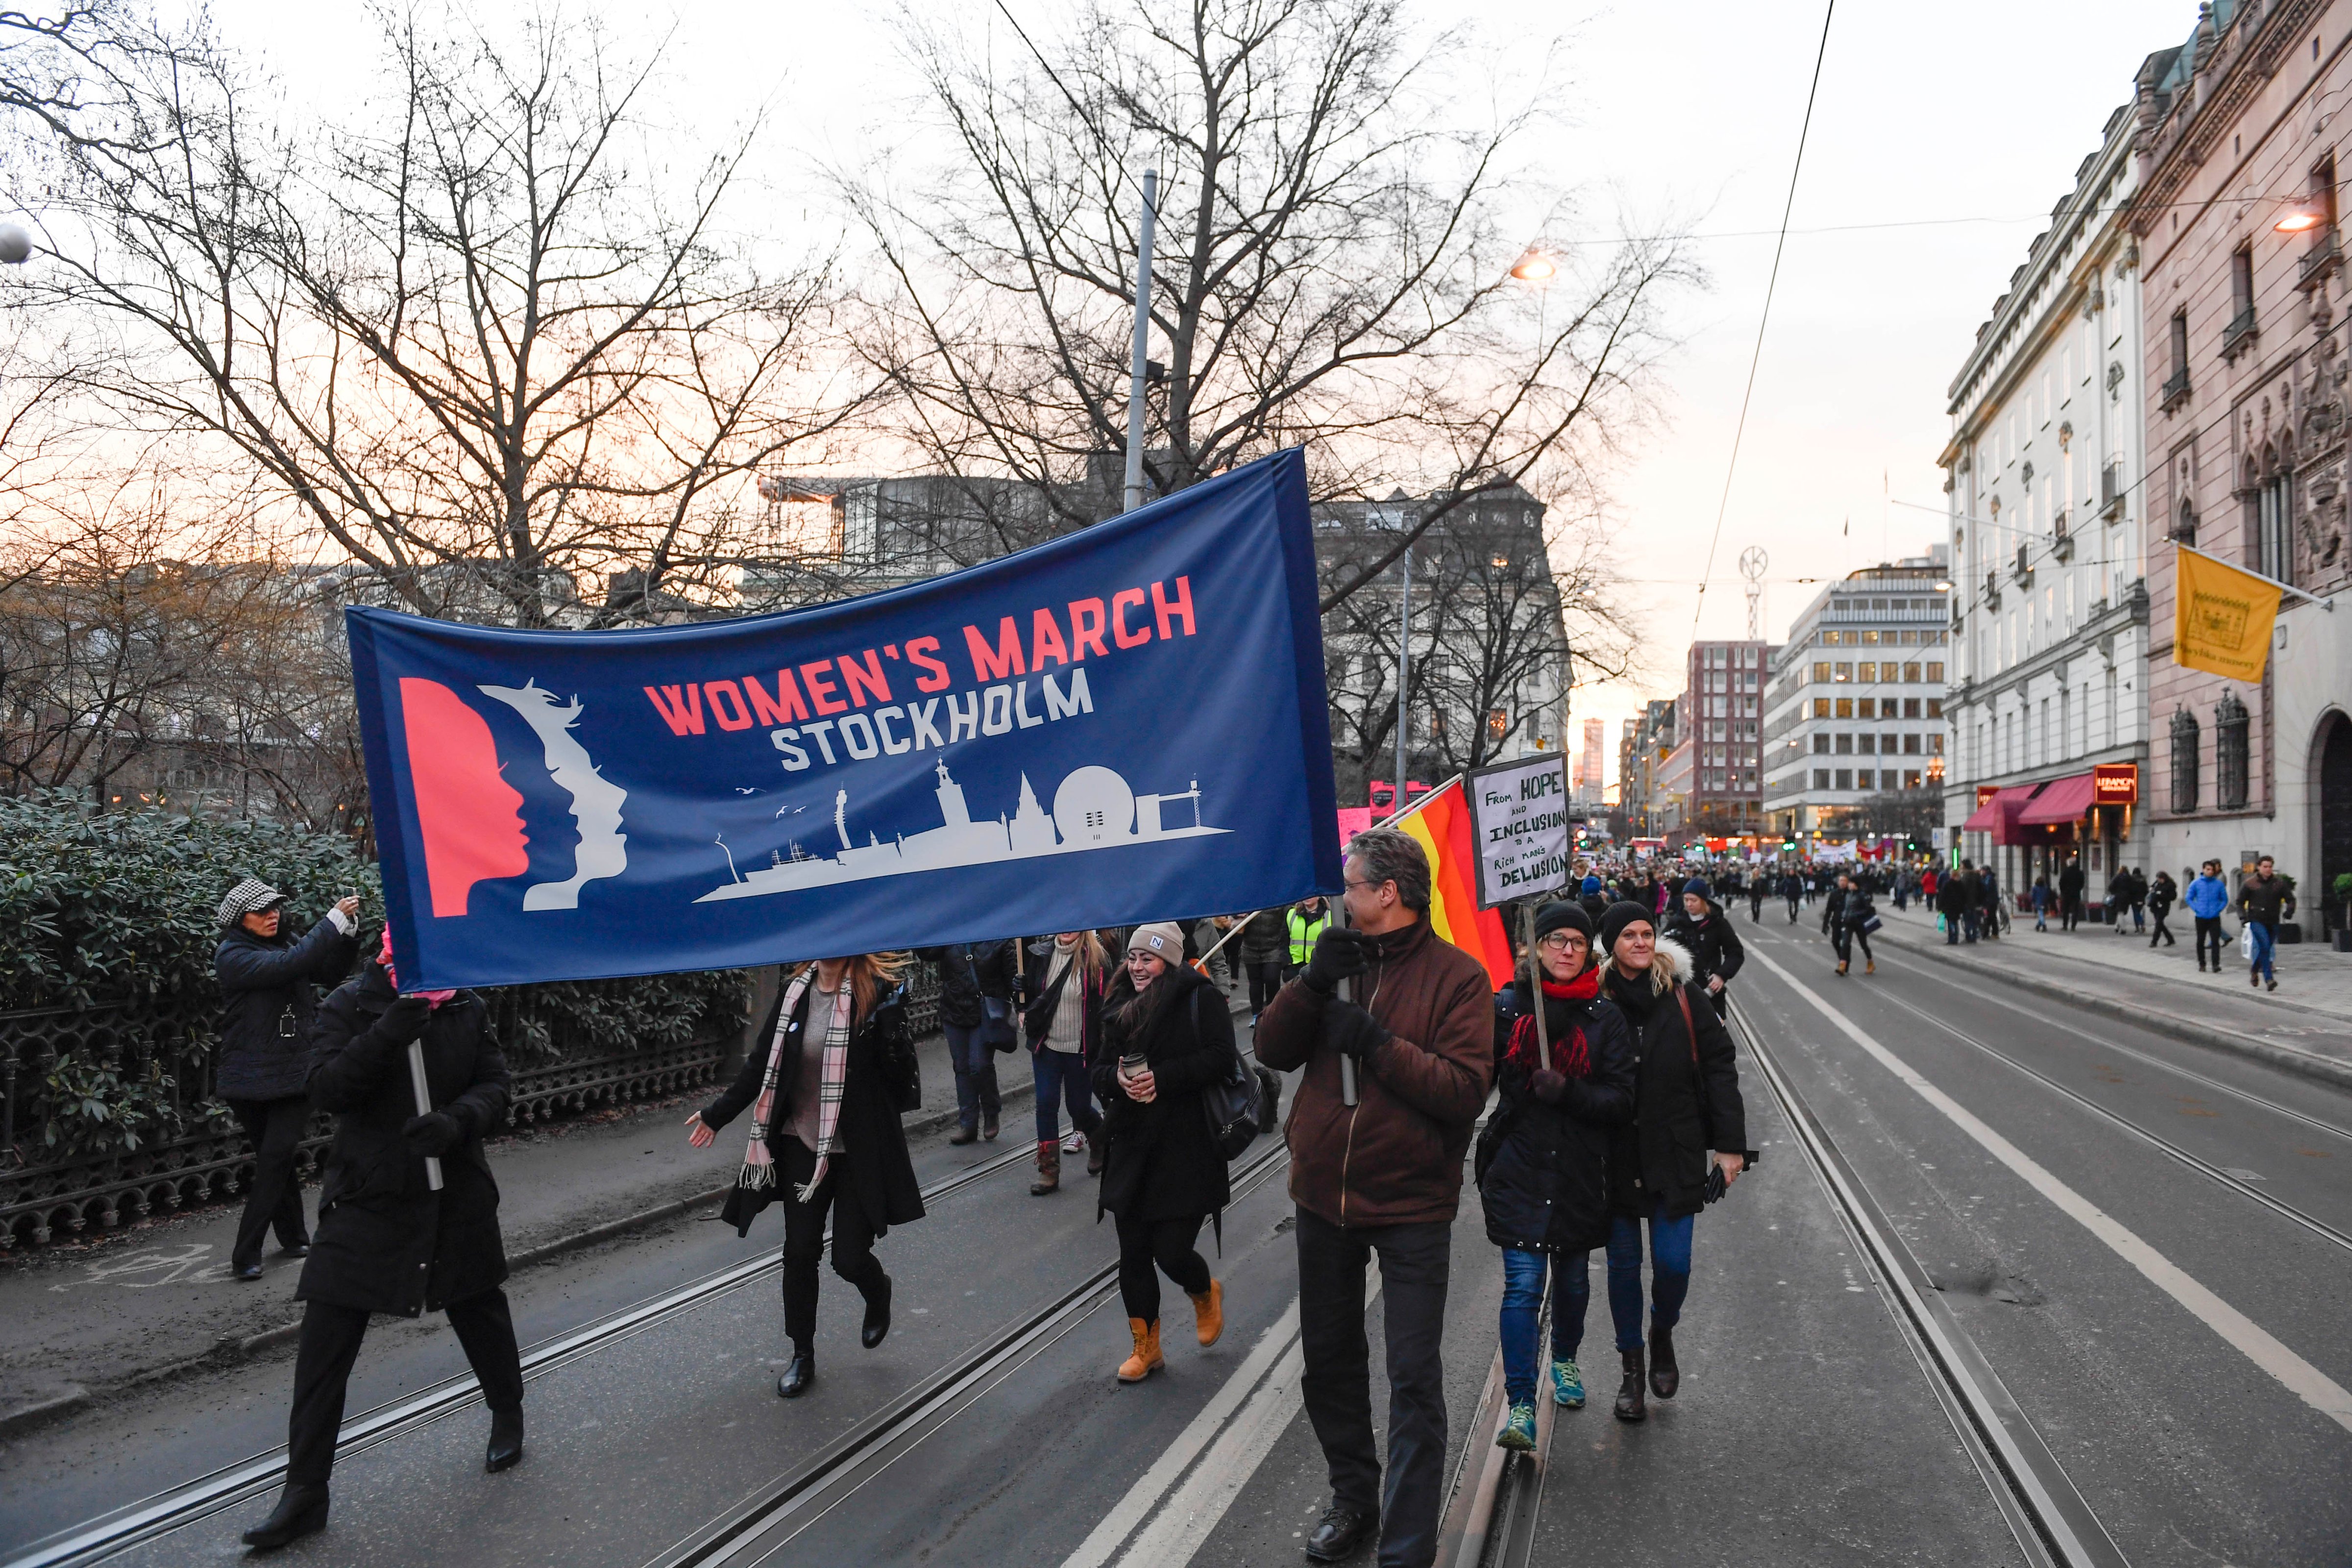 Protesters carrying banners and placards take part in a Women's March in Stockholm, Sweden, on January 21, 2017, one day after the inauguration of U.S. President Donald Trump. (Pontus Lundahl—AFP/Getty Images)